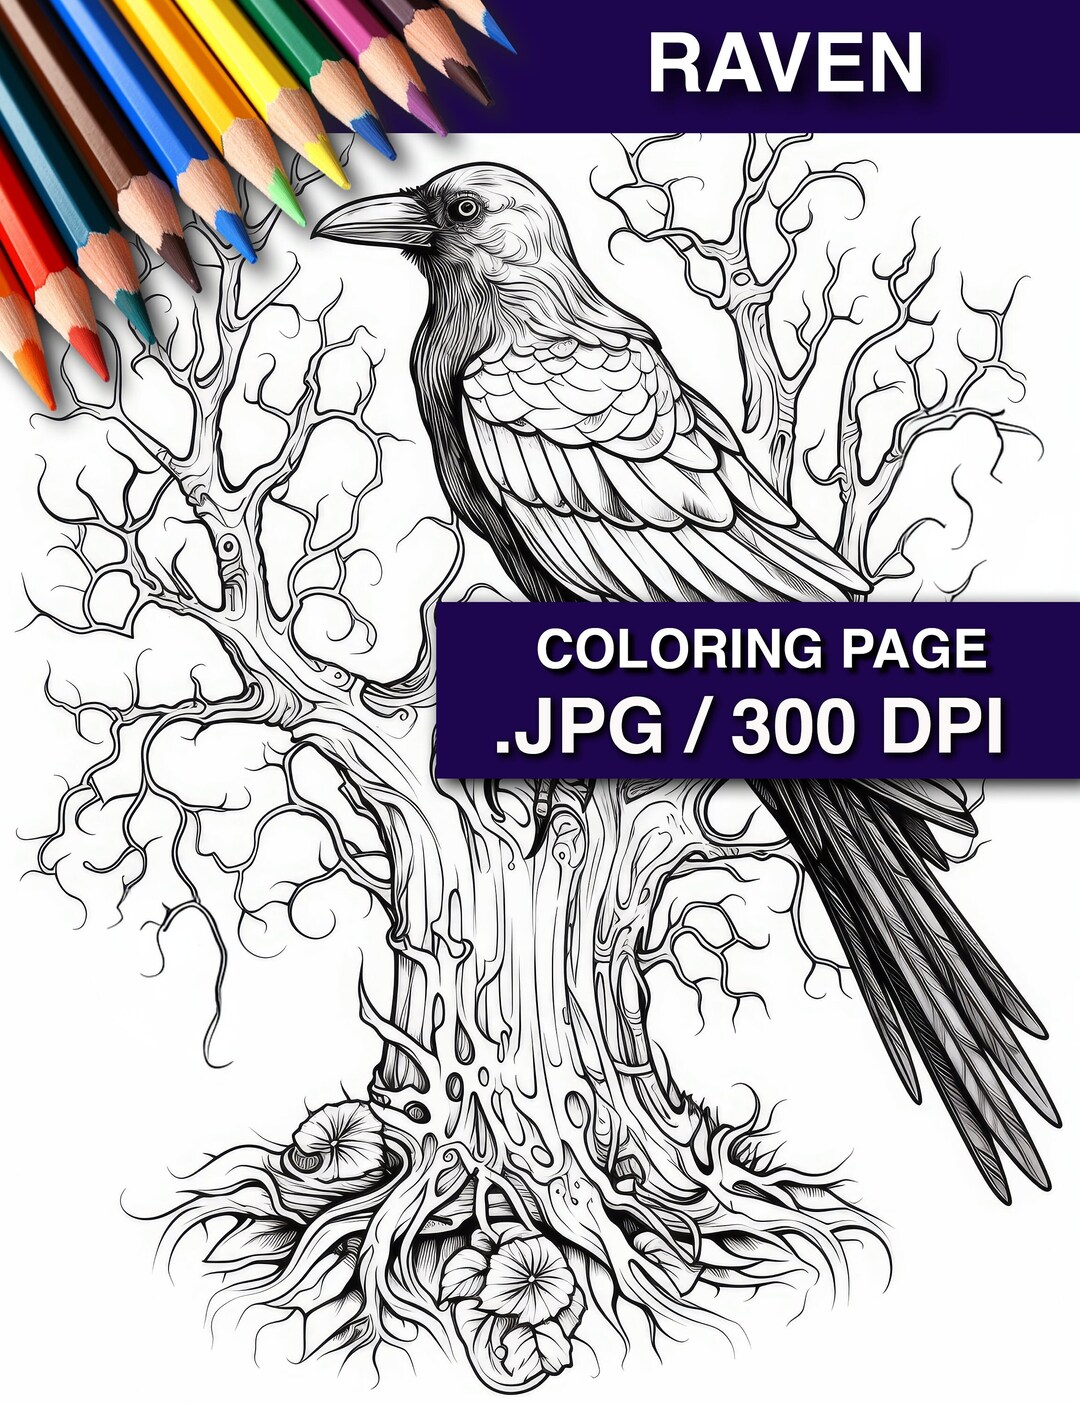 Raven coloring page witchy decor bird coloring sheet witchy academia coloring book stress relief nature art bird instant download